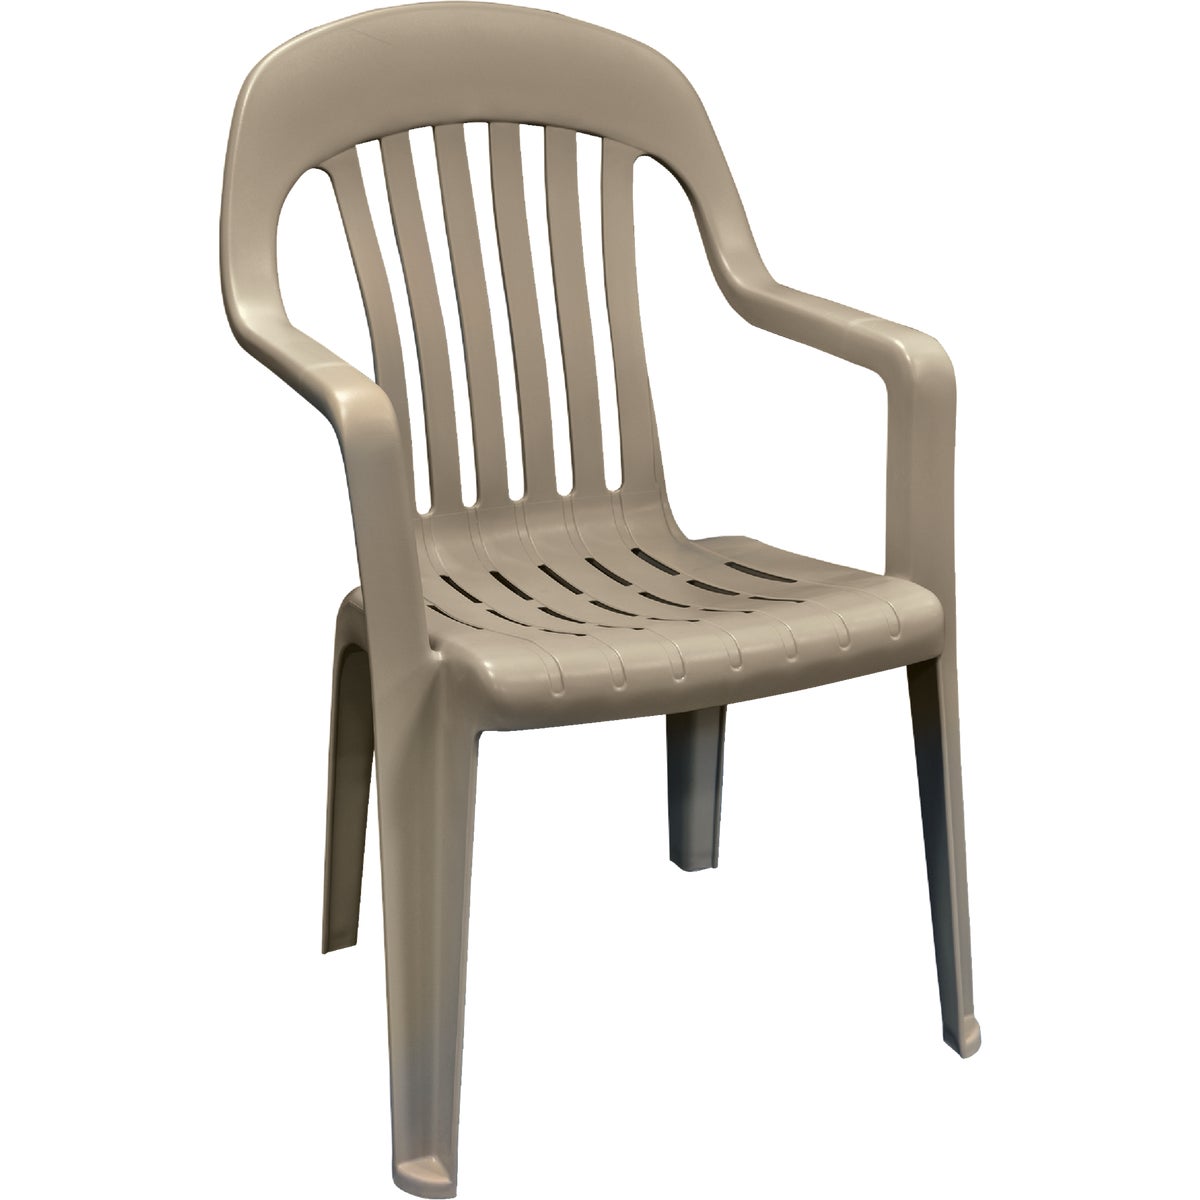 Item 801599, Stackable high back chair is perfect for porch, patio, or deck.